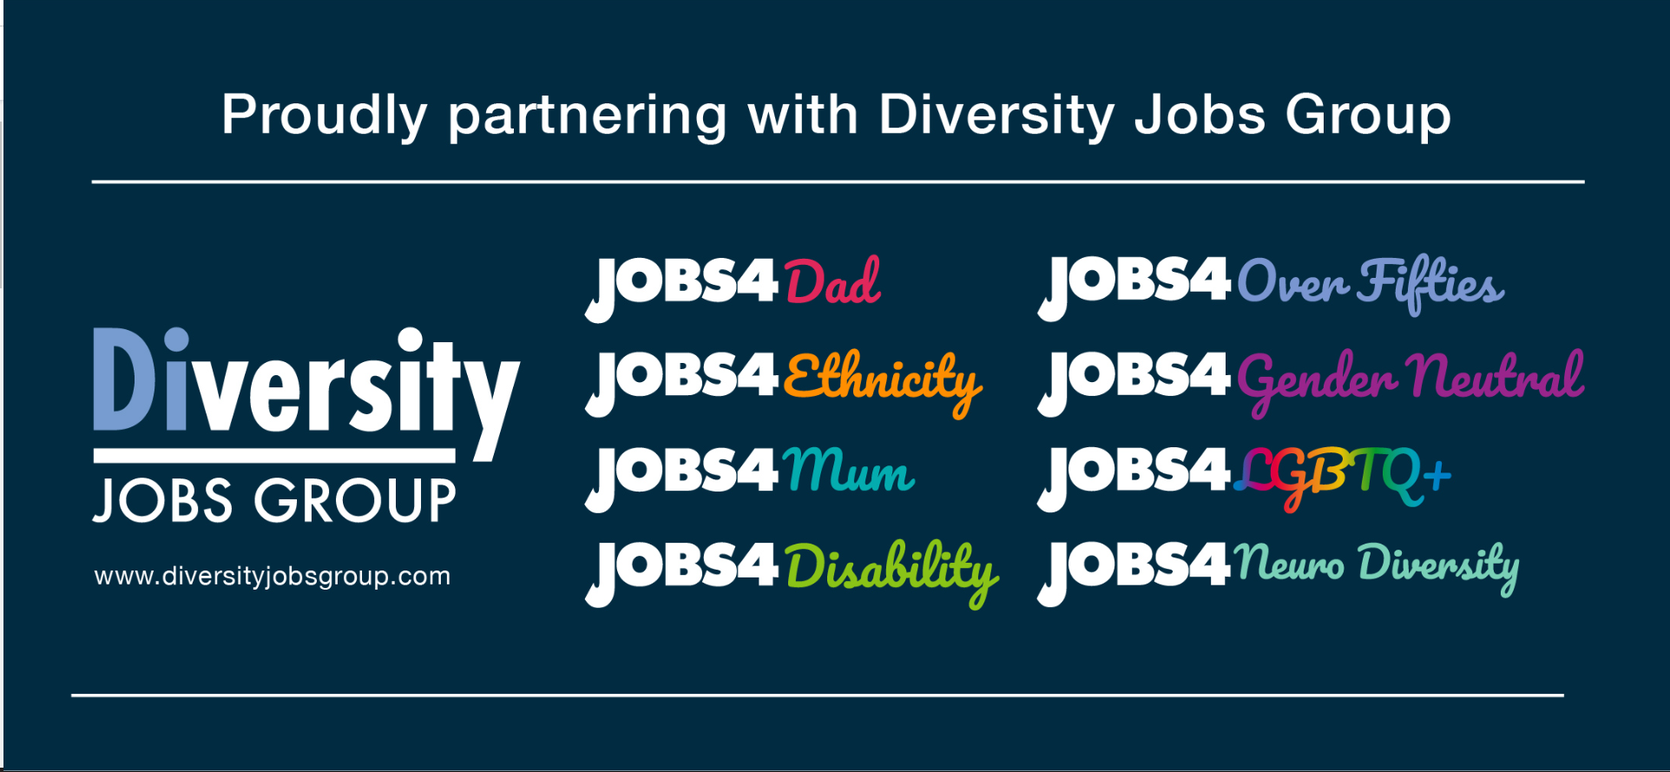 Proudly partnering with the Diversity Jobs Group